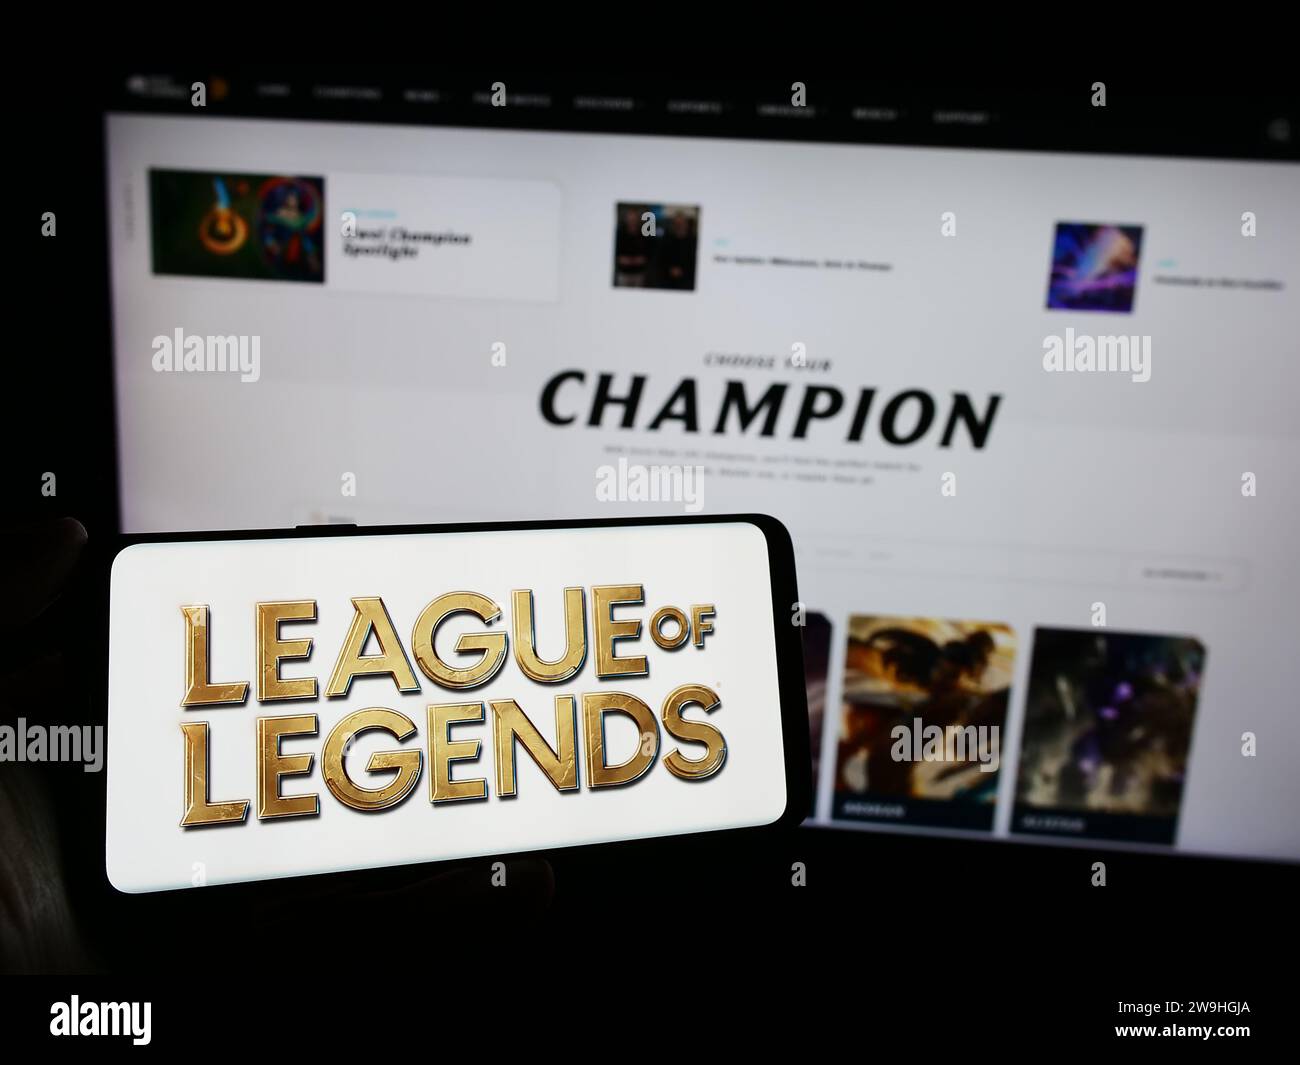 Person holding mobile phone with logo of online multiplayer video game League of Legends (LoL) in front of web page. Focus on phone display. Stock Photo